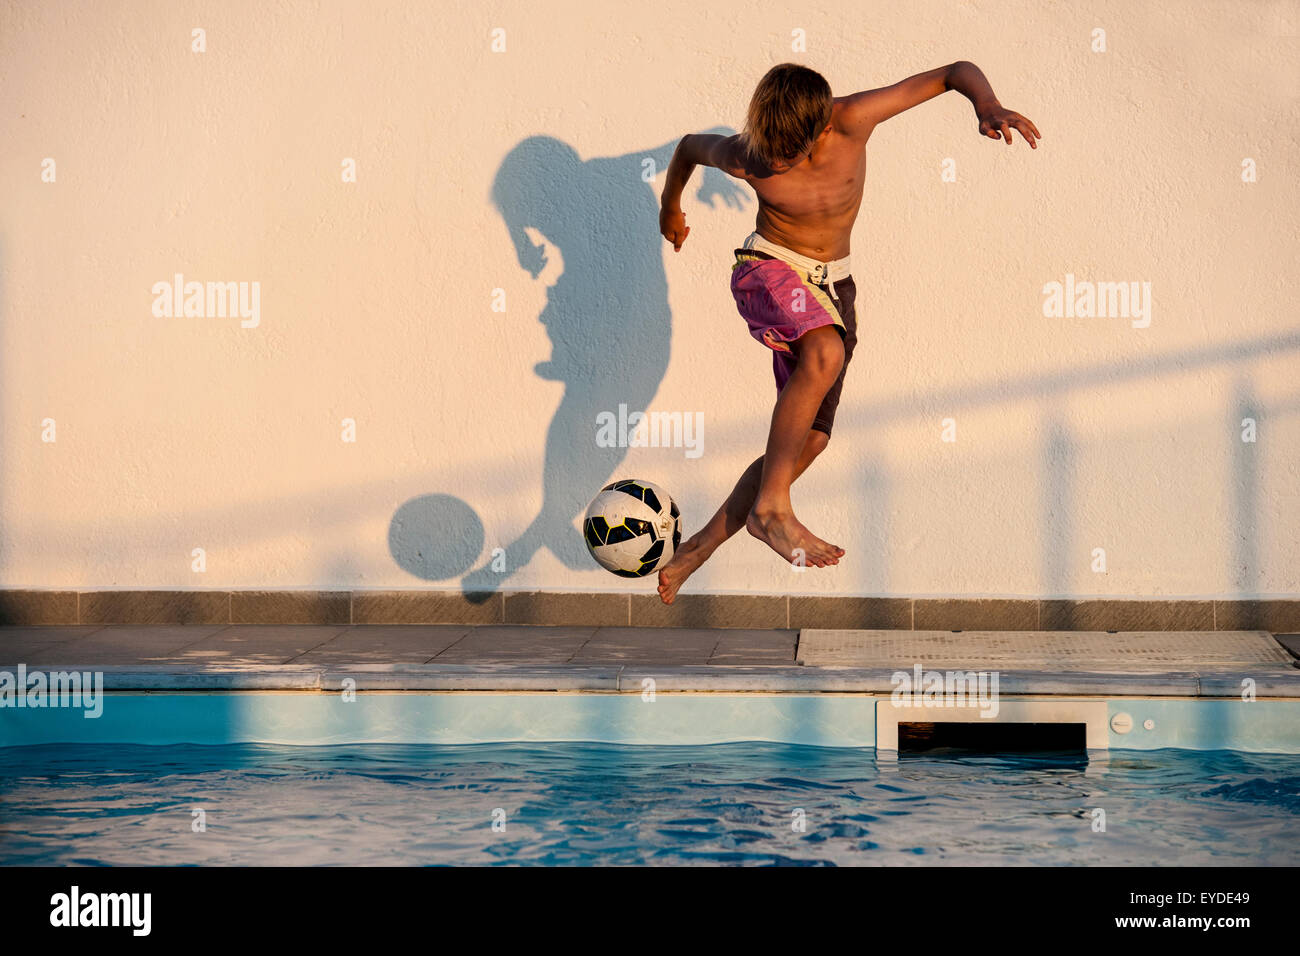 A boy playing football on holiday by a swimming pool. Stock Photo